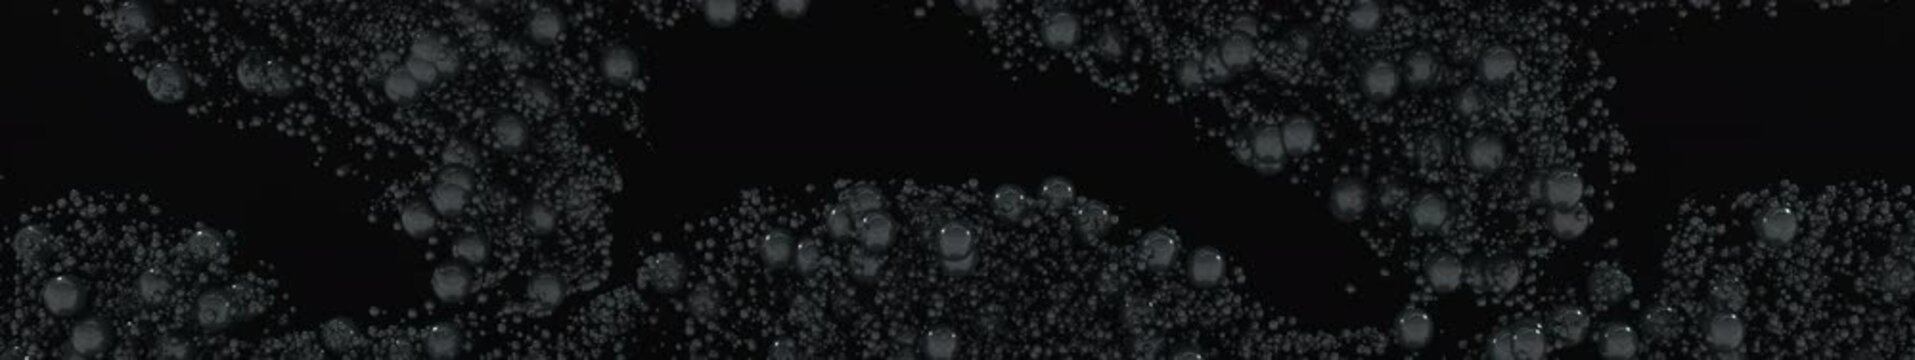 Abstract 3D Dark Particles Close-Up Background.

